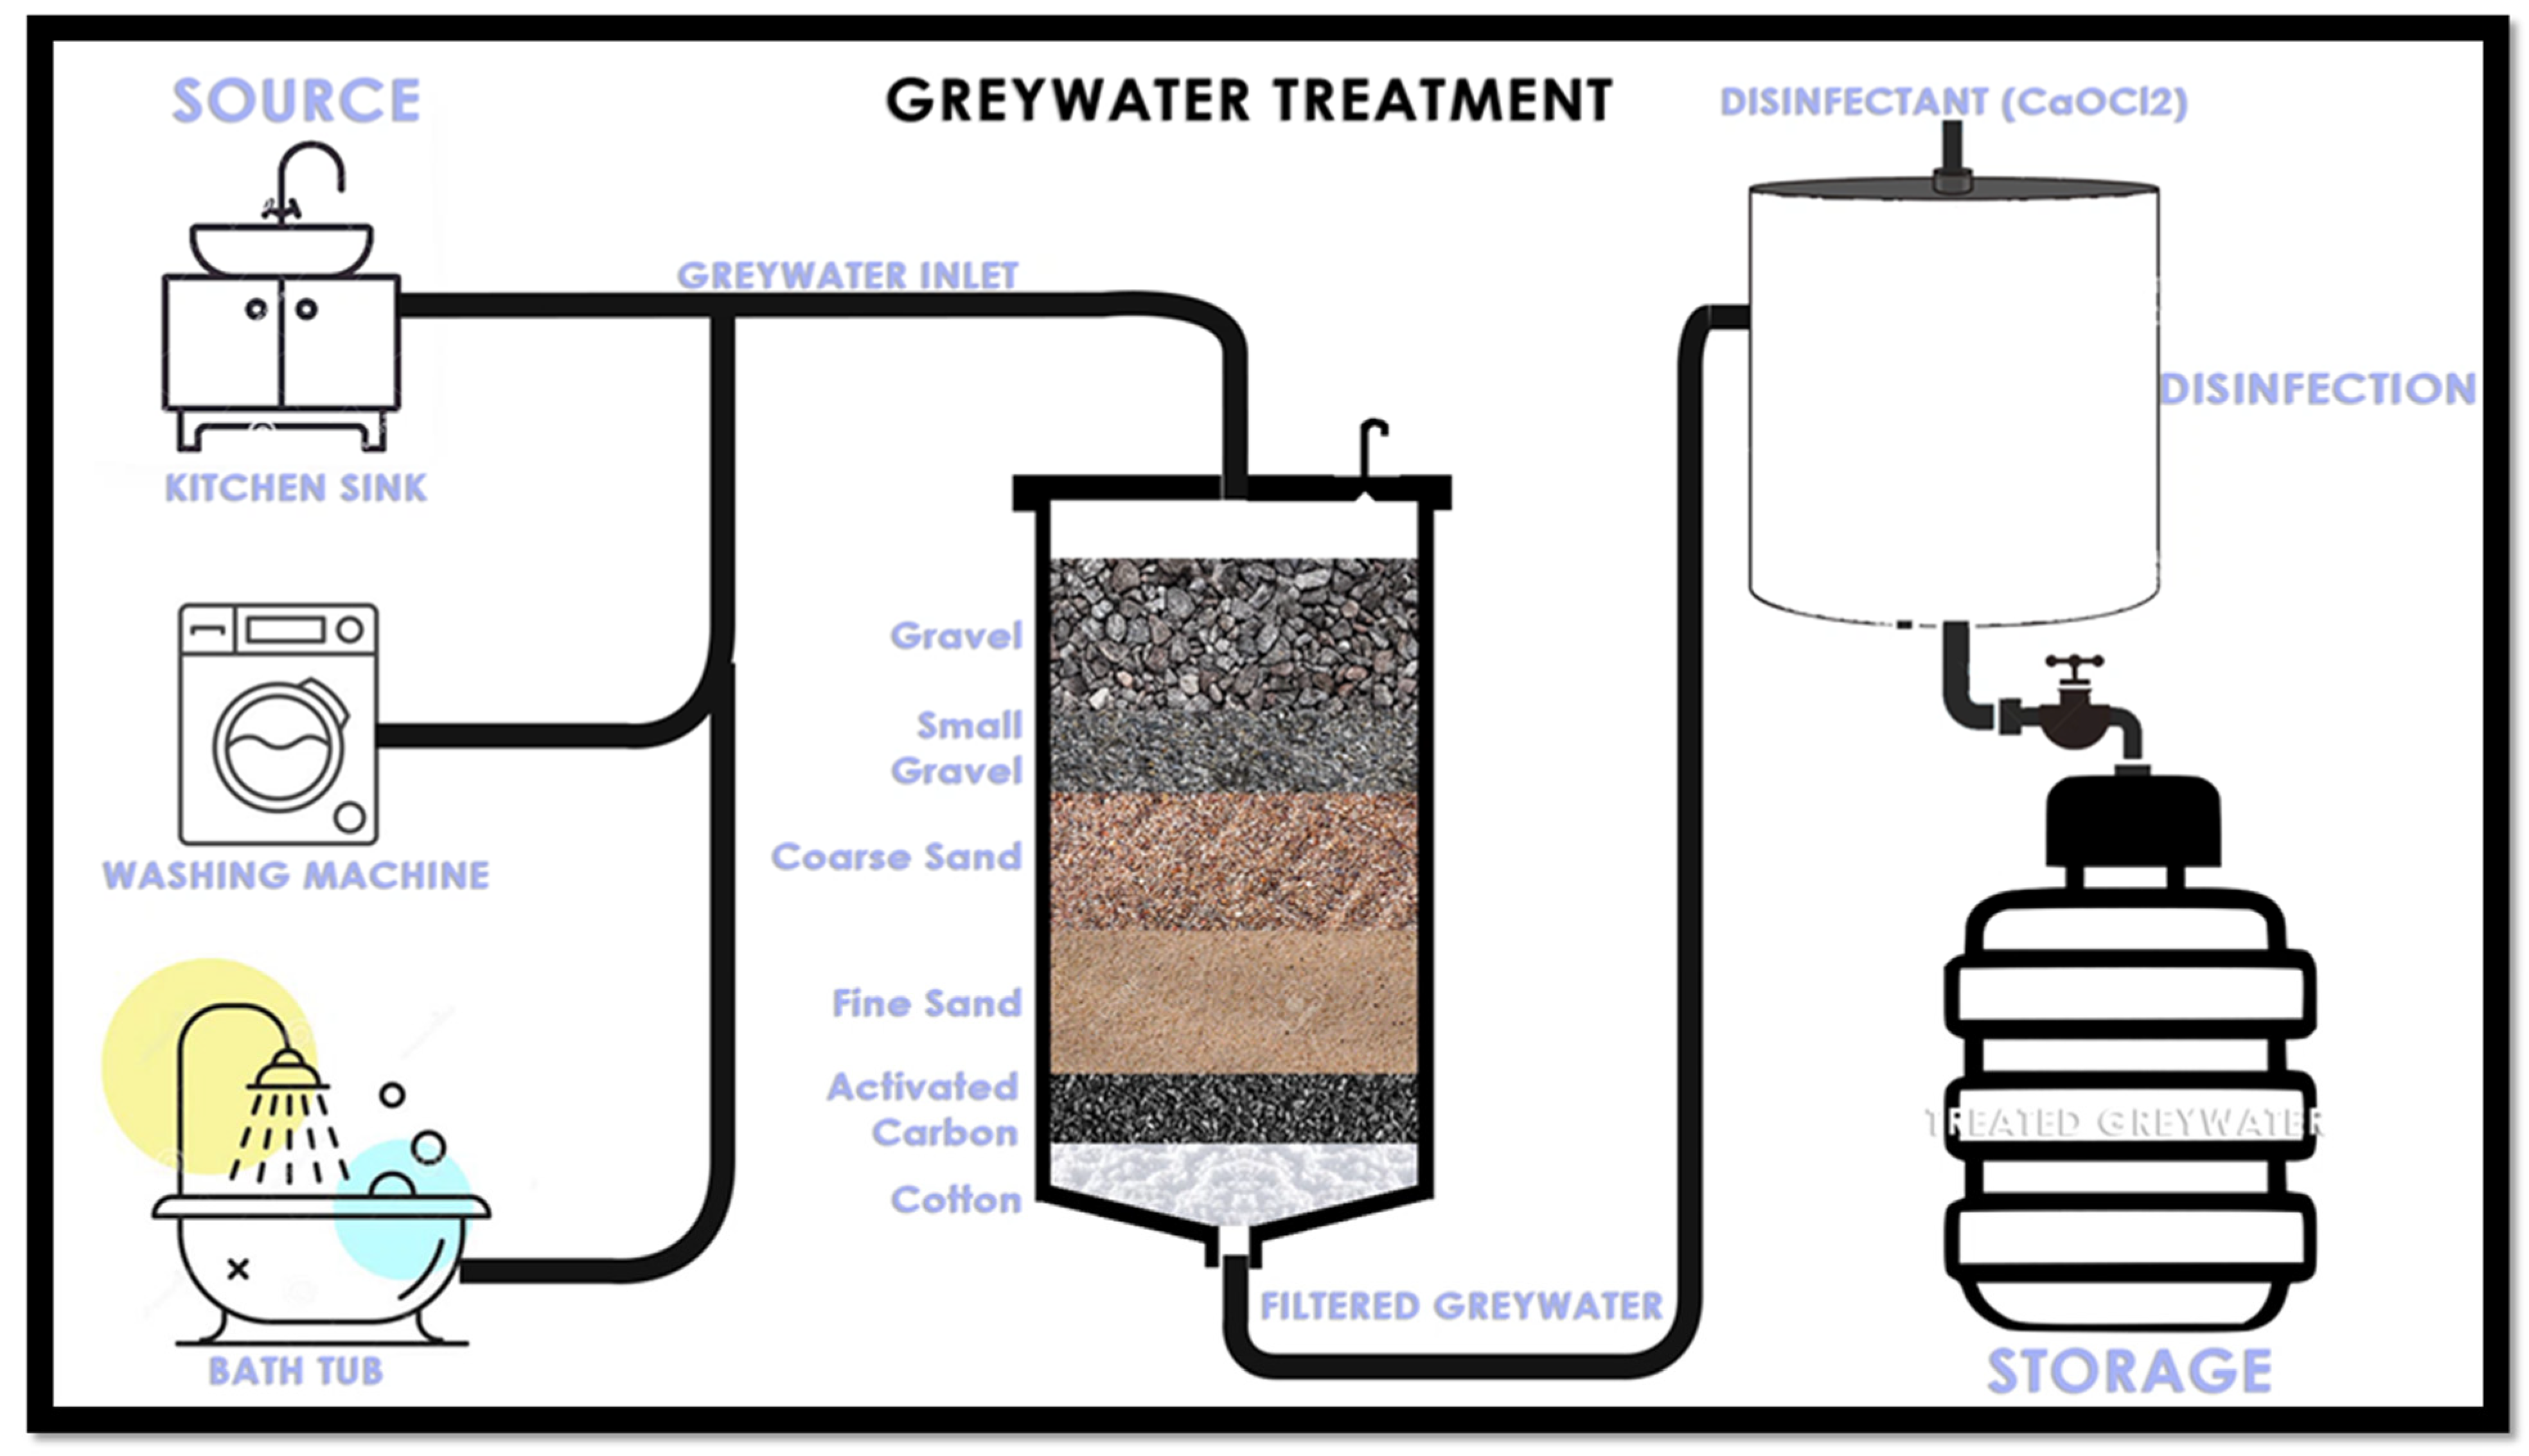 Schematic diagram for the treatment of greywater